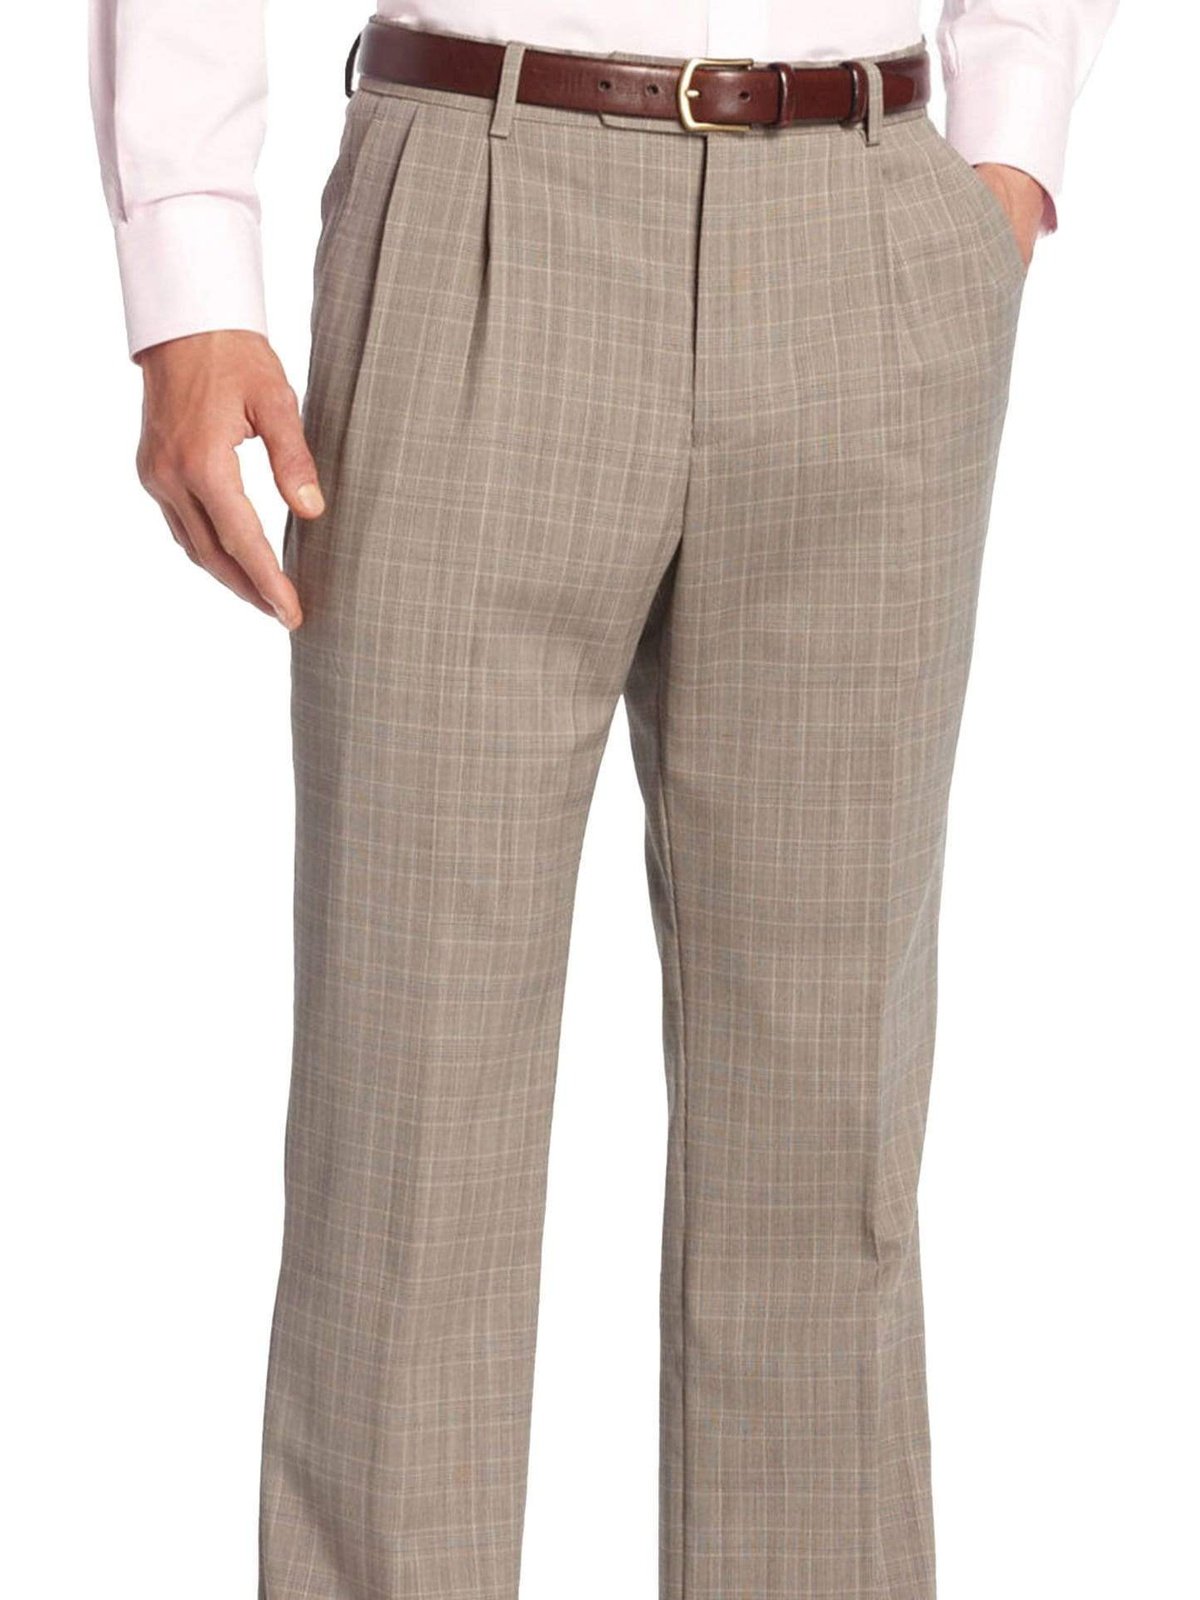 Nautica Classic Fit Tan Plaid Double Pleated Stretch Wool Blend Dress Pants - The Suit Depot